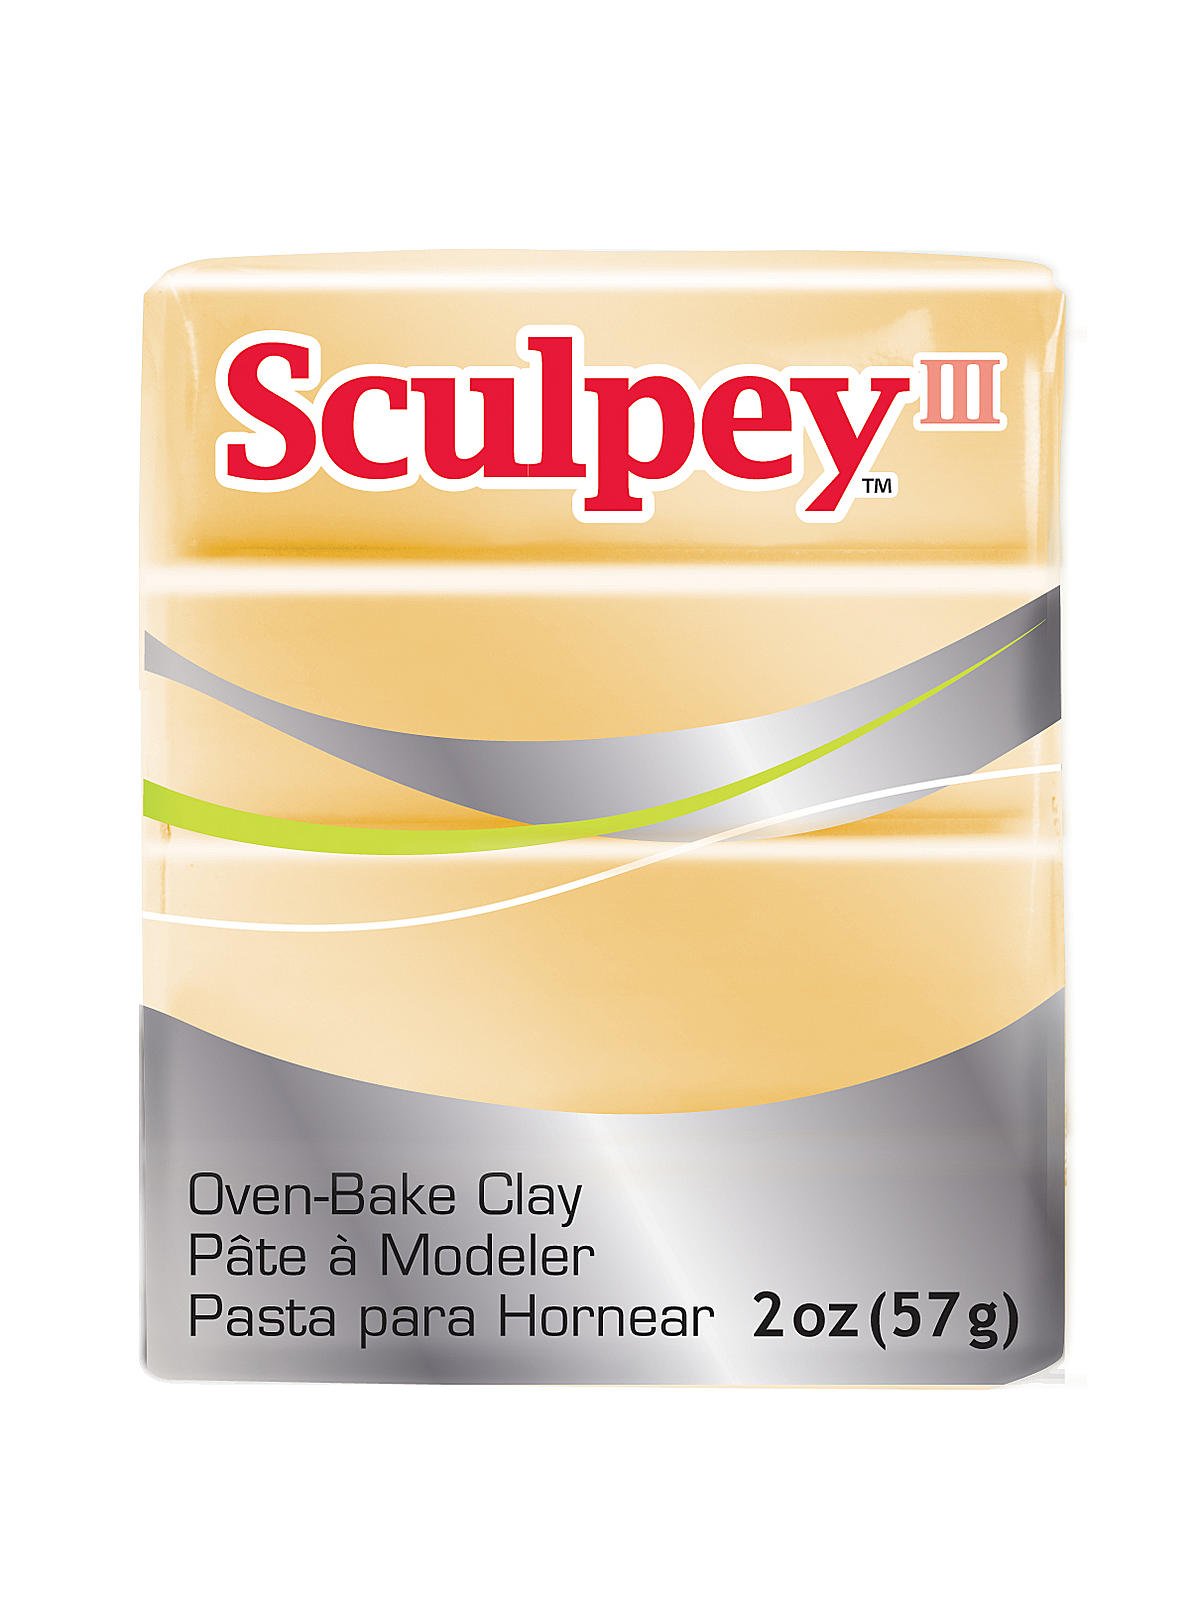 Sculpey Sculpey III Oven-Bake Polymer Clay 2oz Jewelry Gold 1132